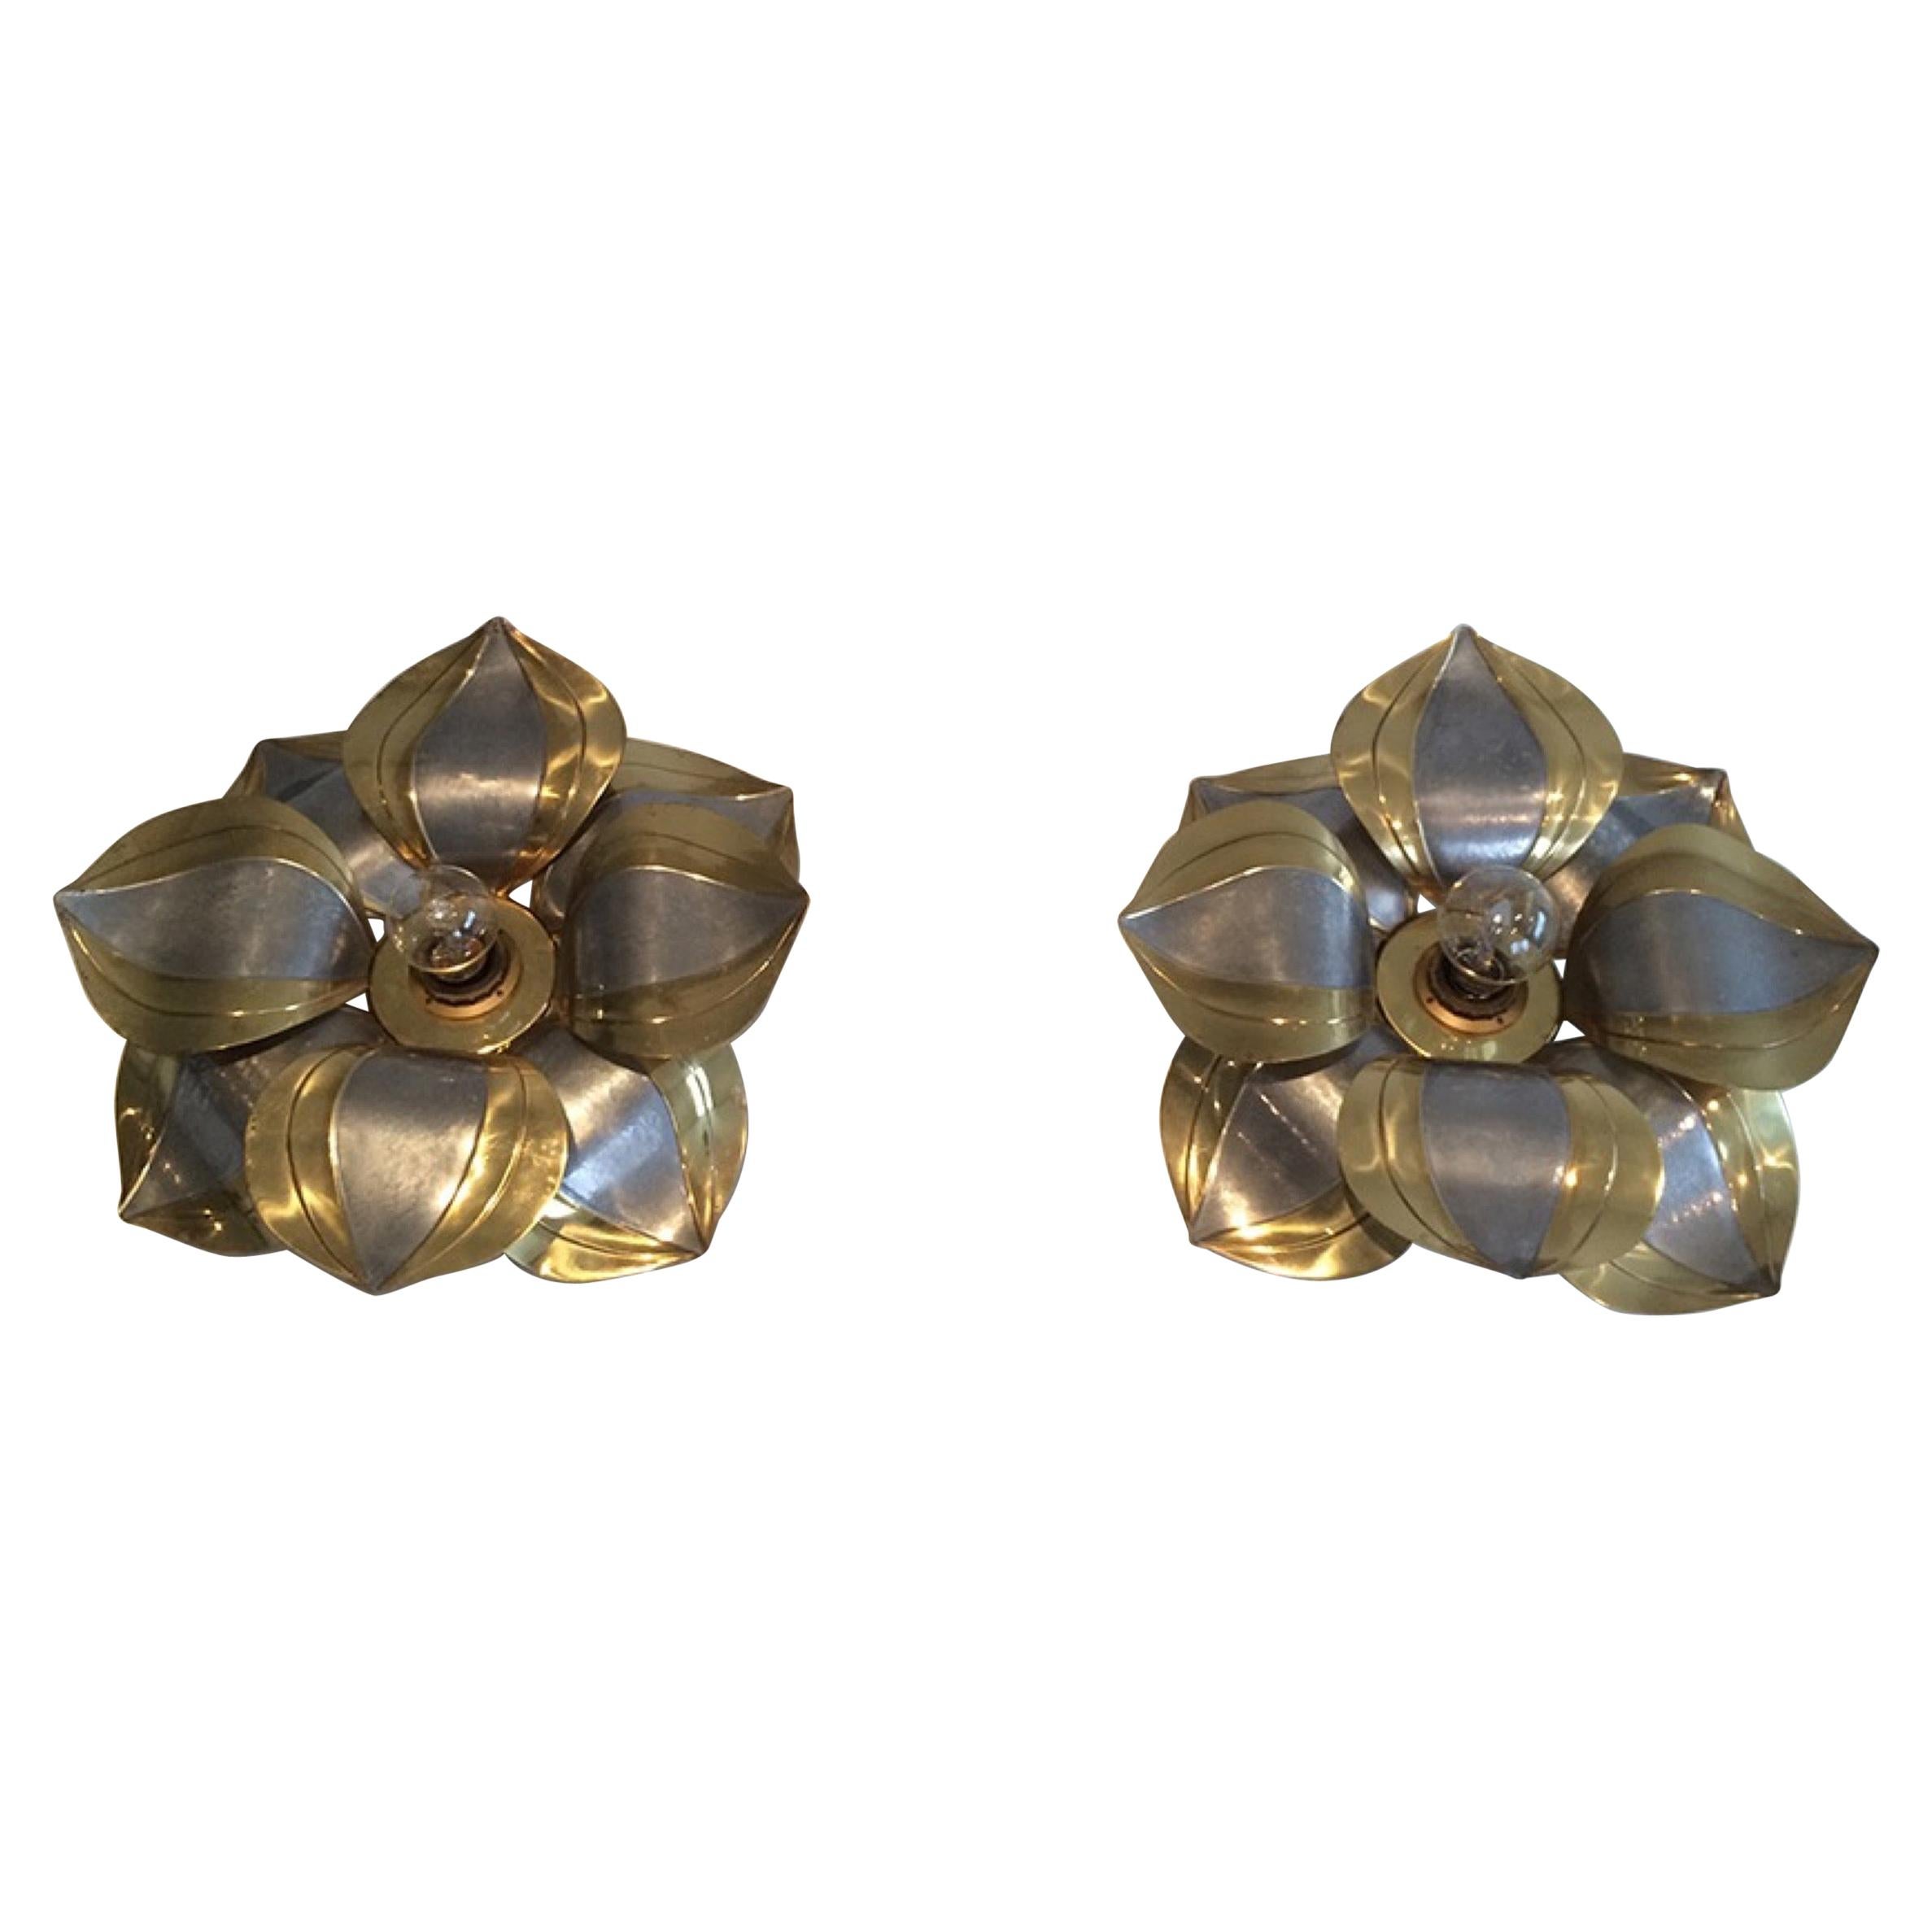 Unusual Pair of Brass and Metal Flower Wall Sconces, circa 1970